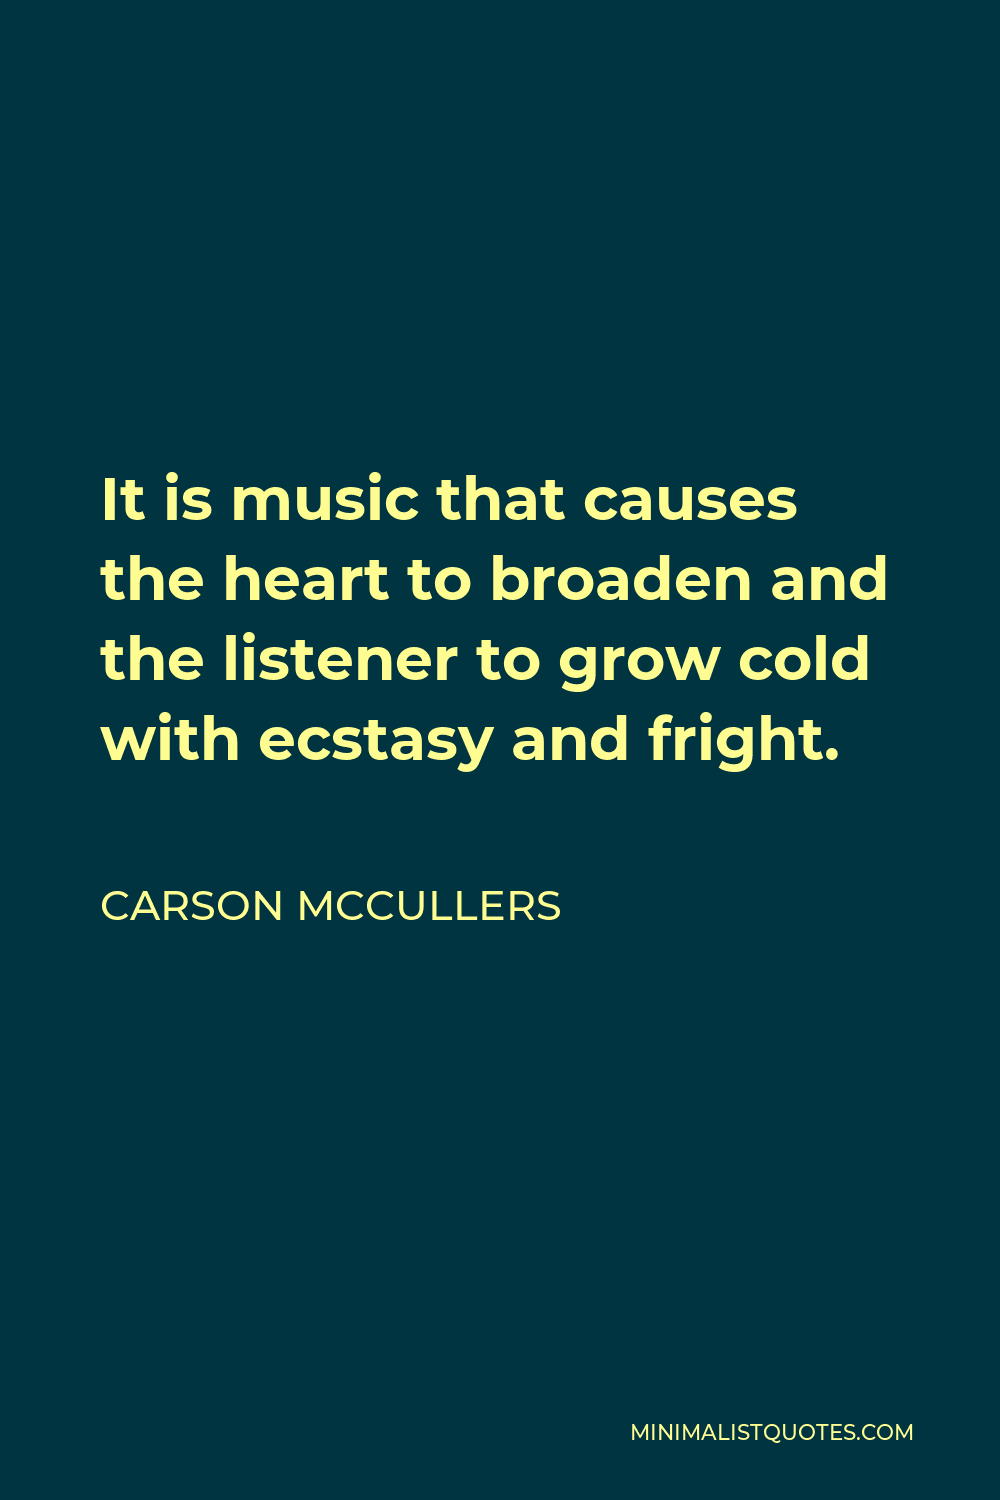 Carson McCullers Quote - It is music that causes the heart to broaden and the listener to grow cold with ecstasy and fright.